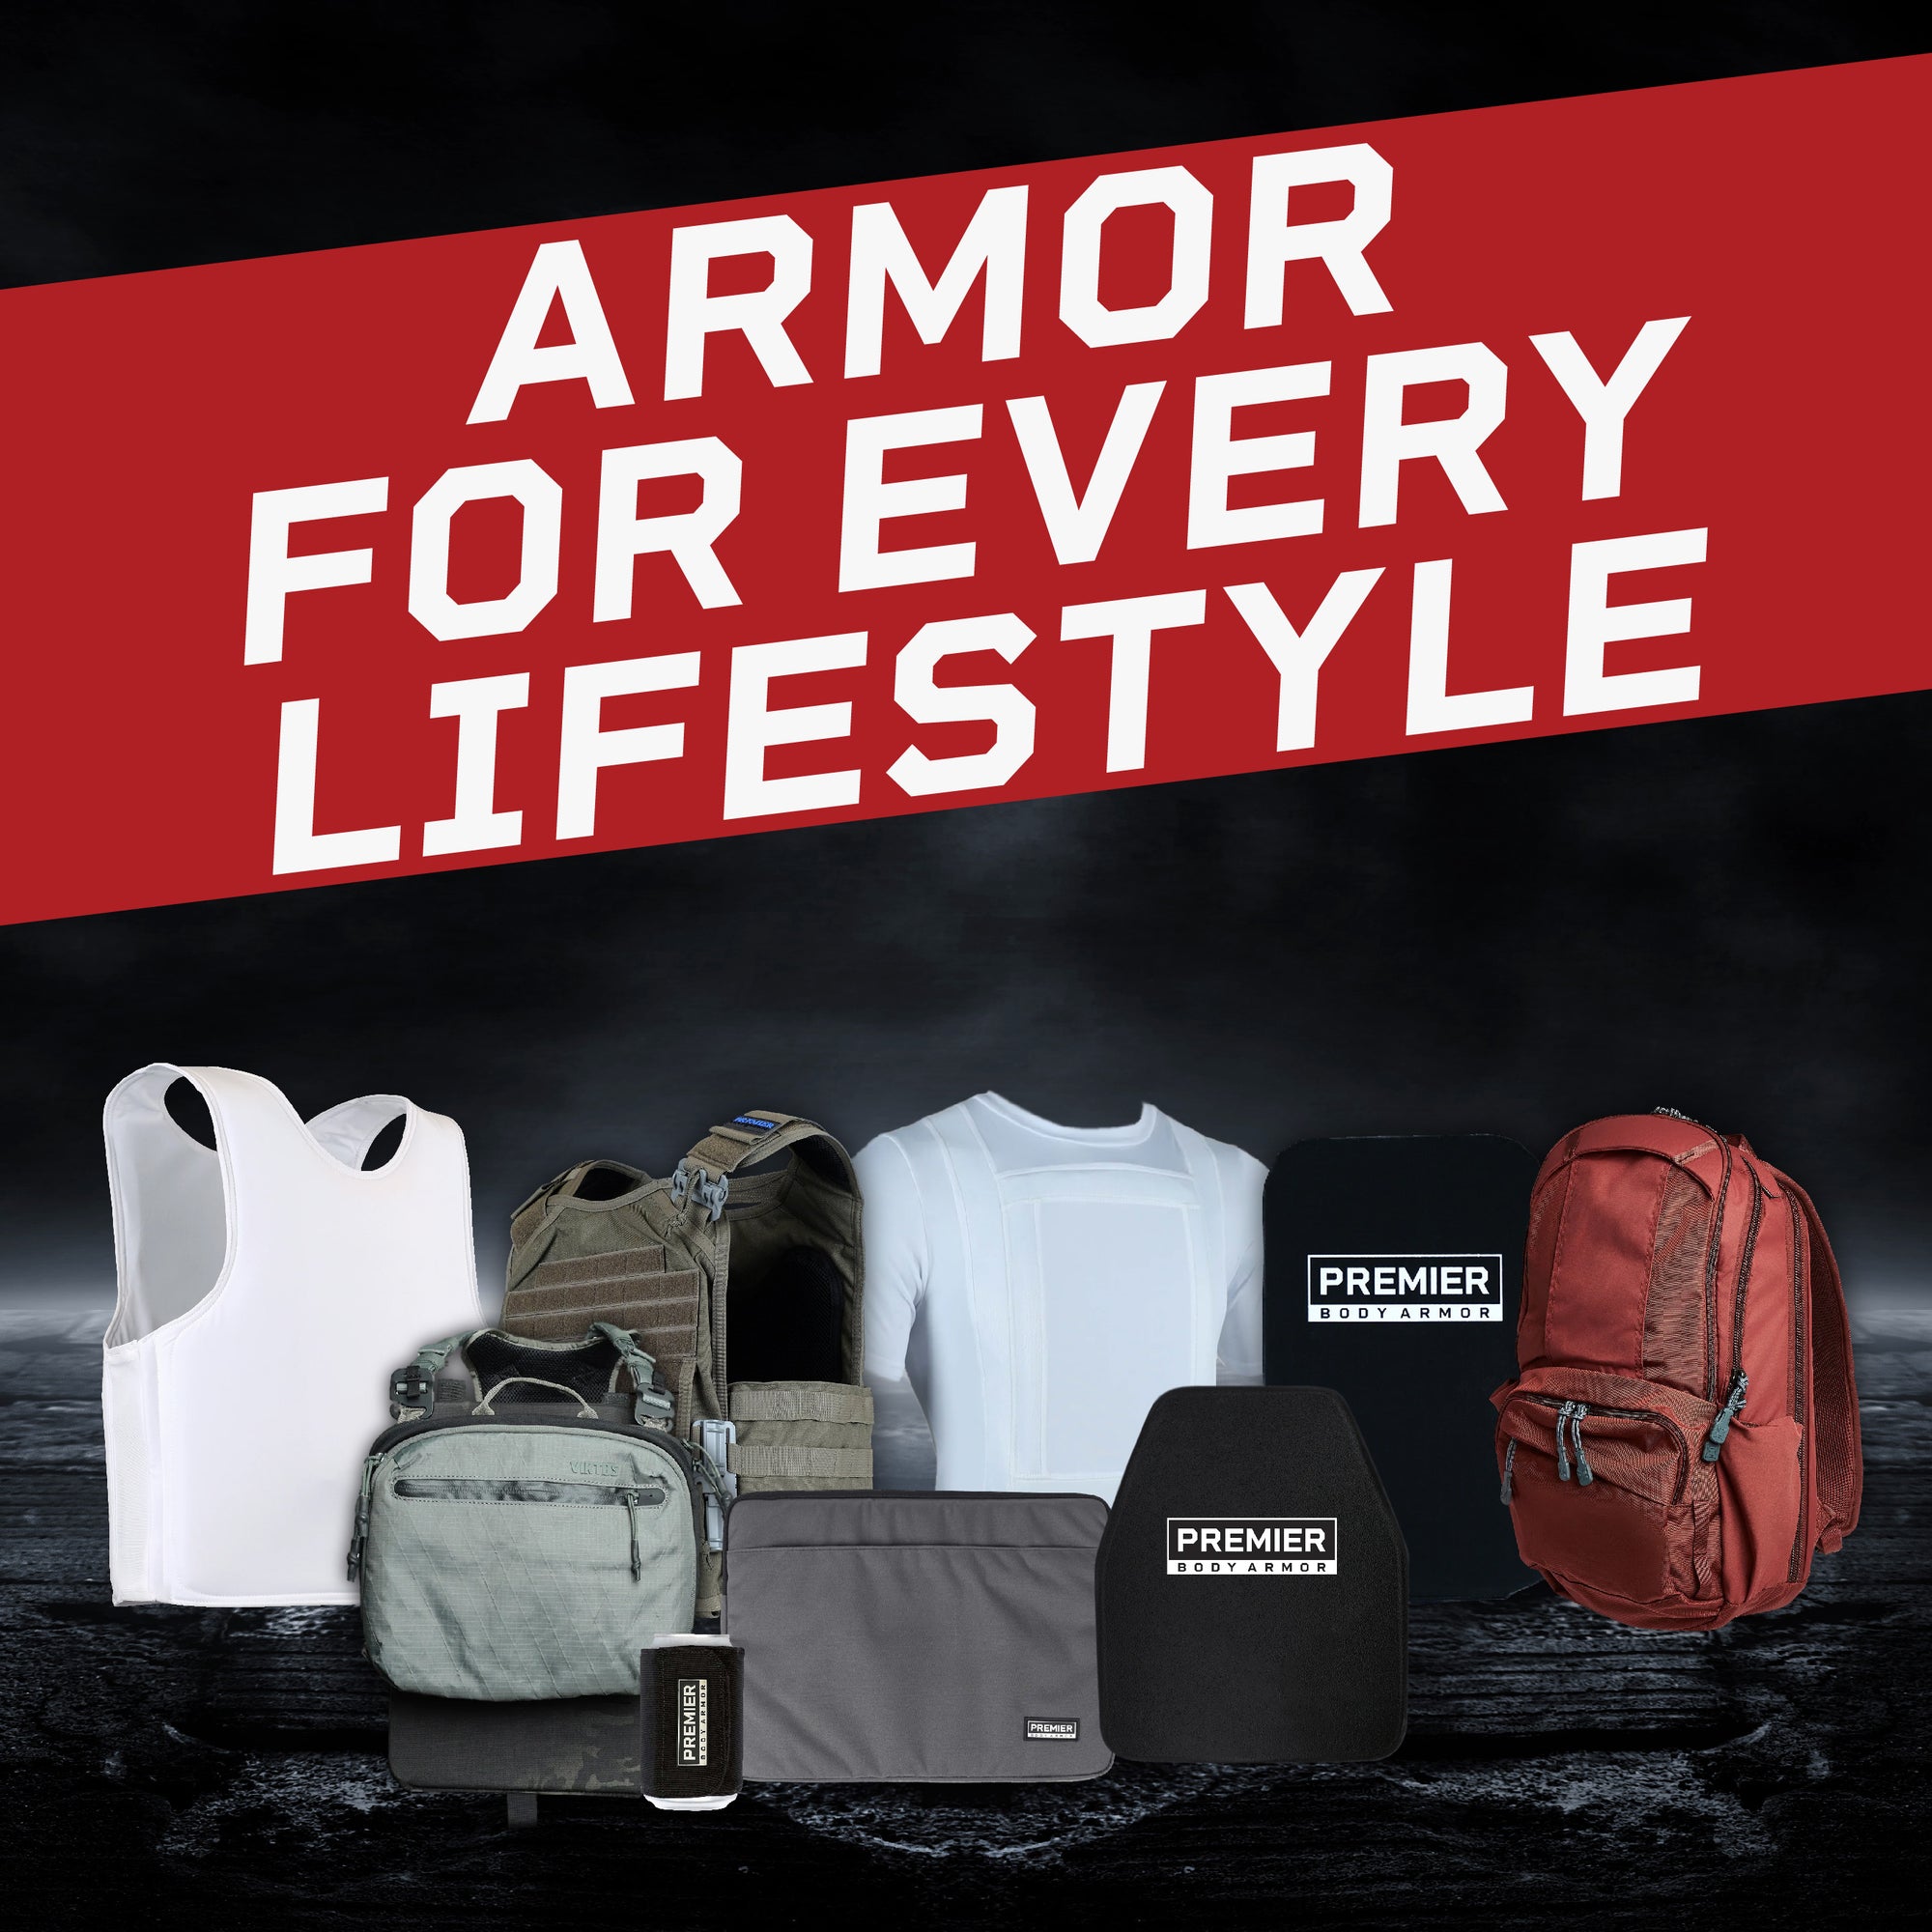 body armor for every lifestyle. concealable armor, bulletproof vests, backpack panels, and more